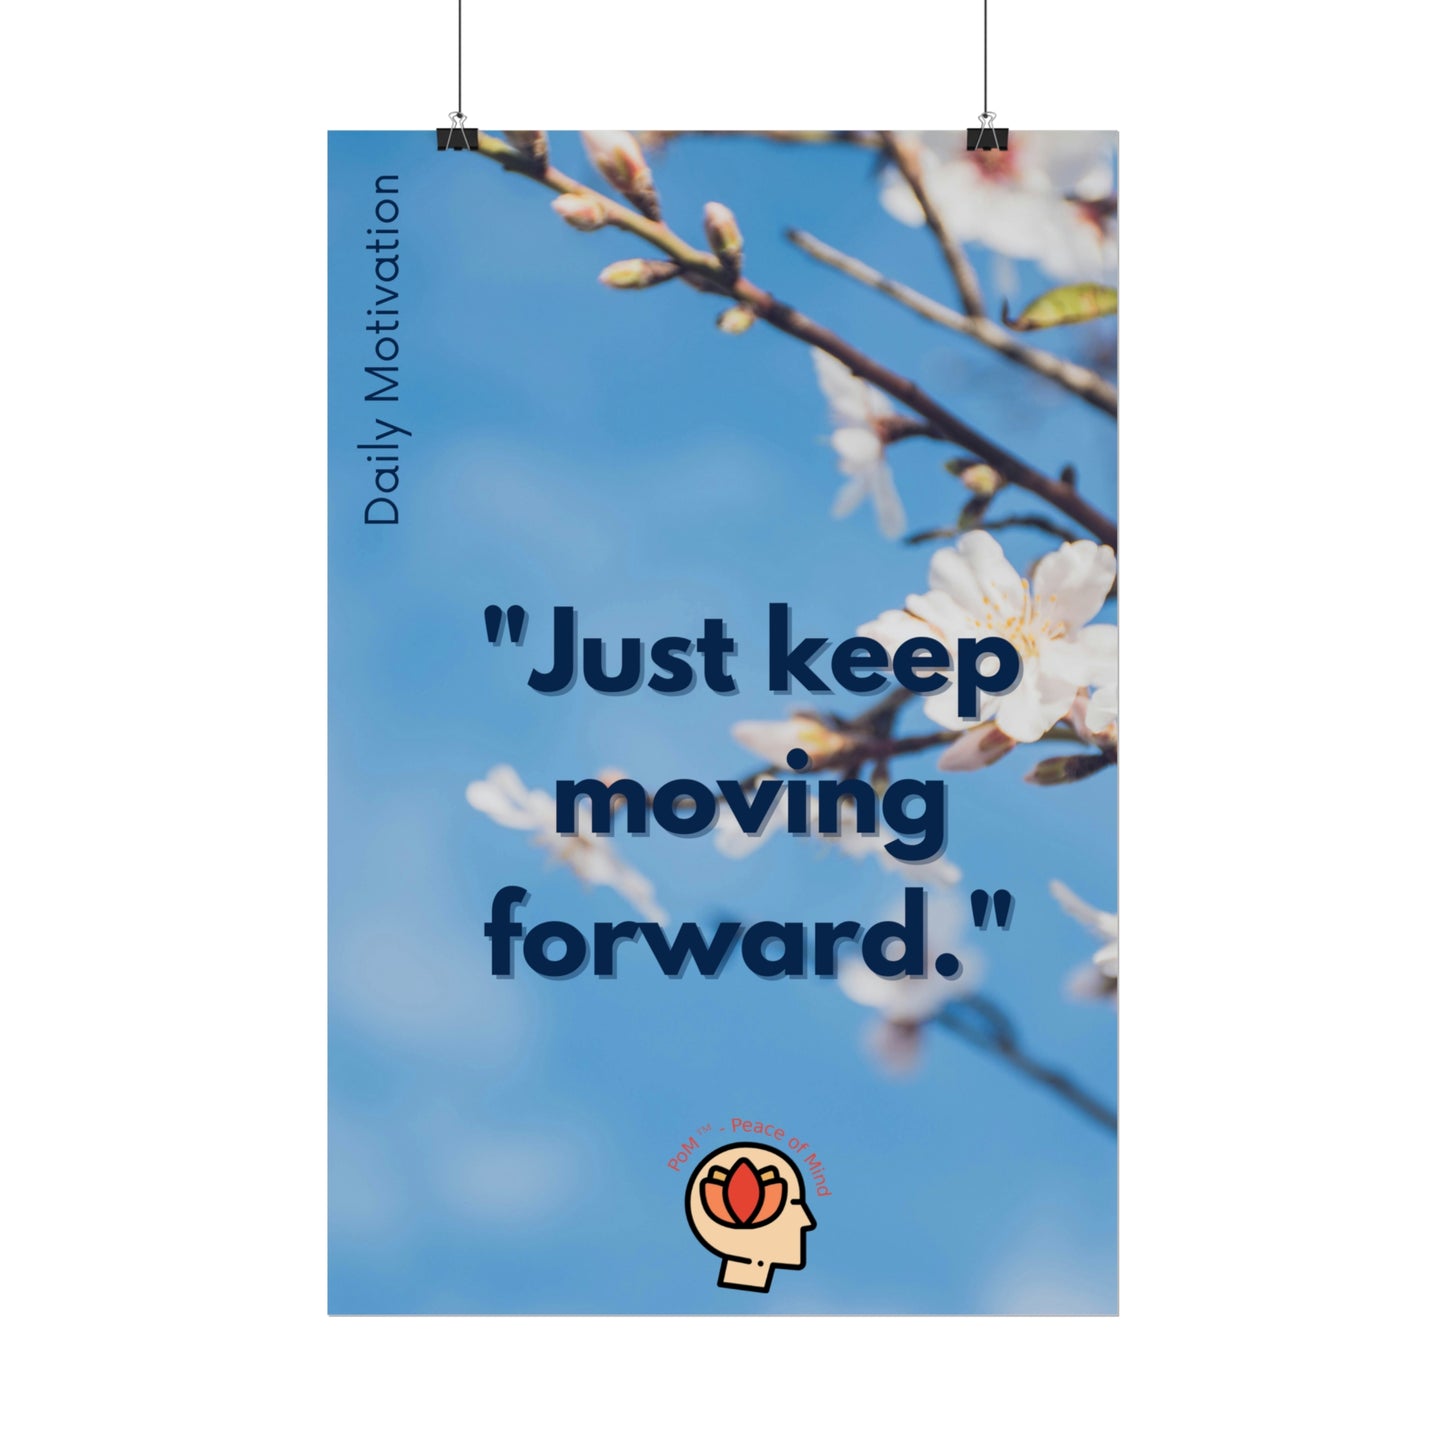 PoM's Self Motivation series ... "Just keep moving forward" (affirmation). - Rolled Poster (180, 200 or 285 gsm paper options)